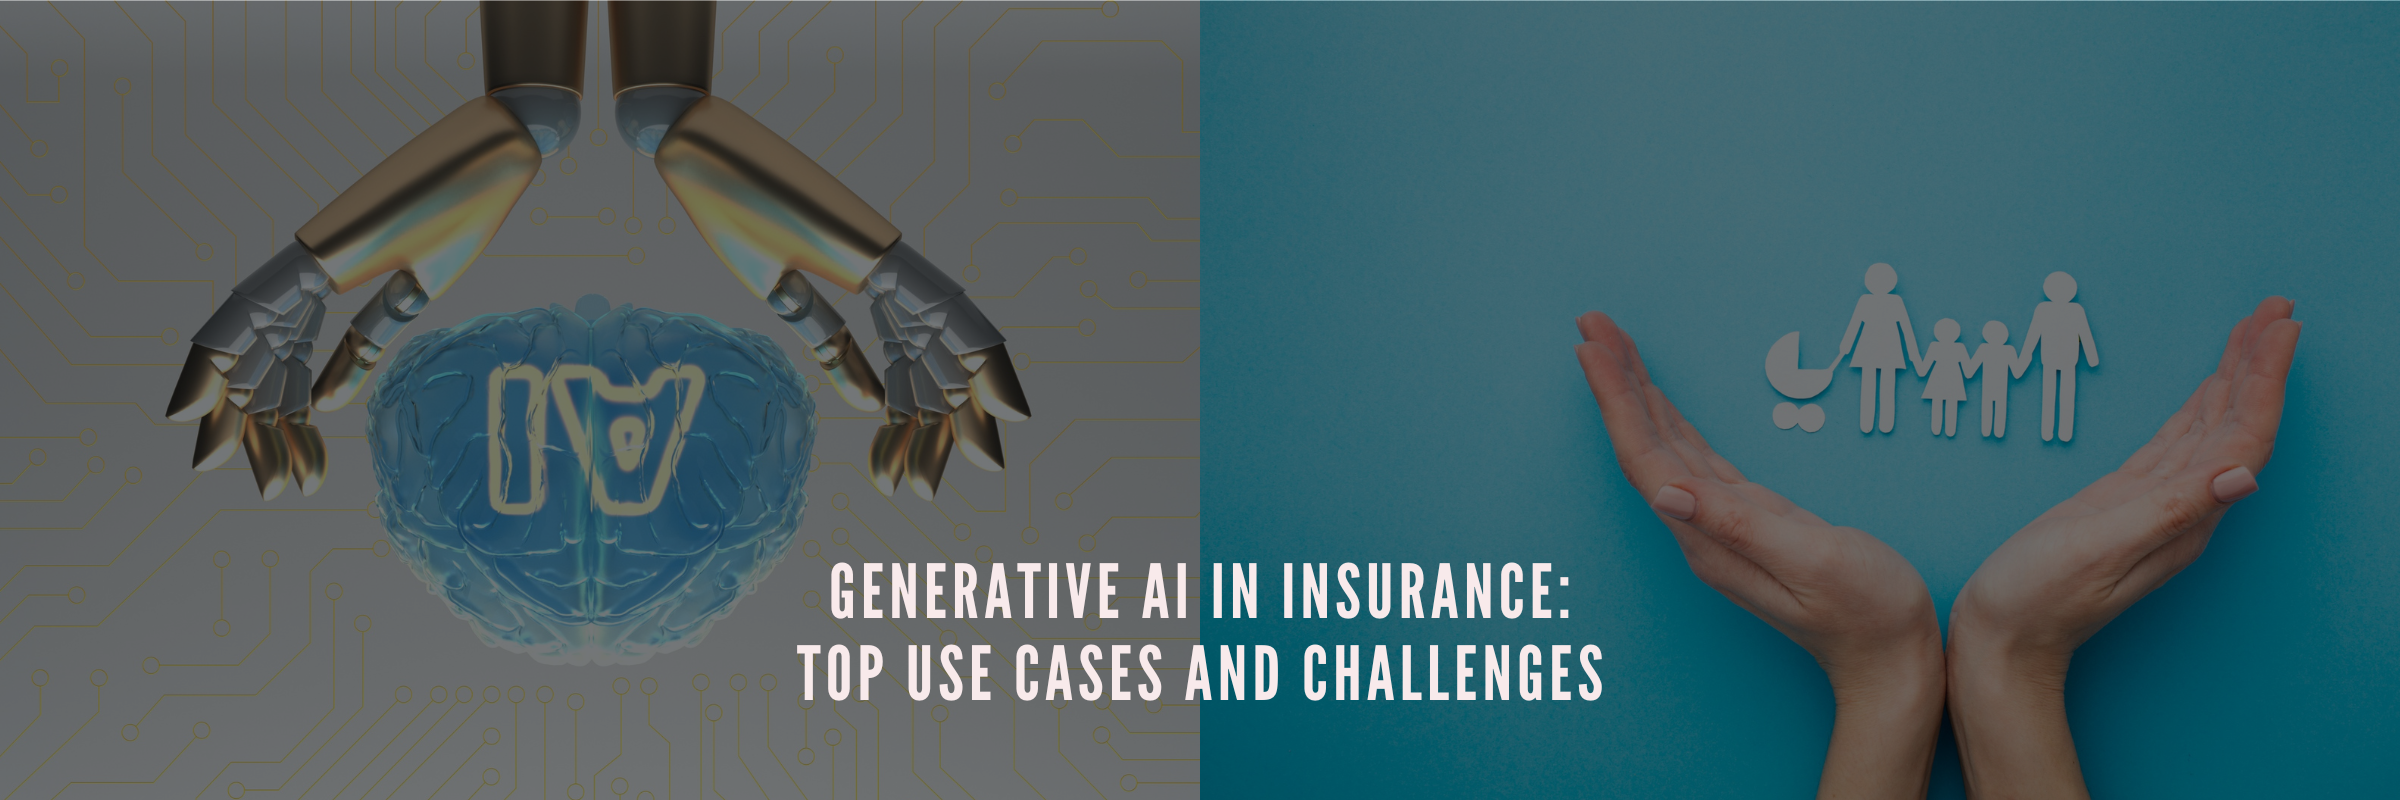 Generative AI in Insurance: Top Use Cases and Challenges